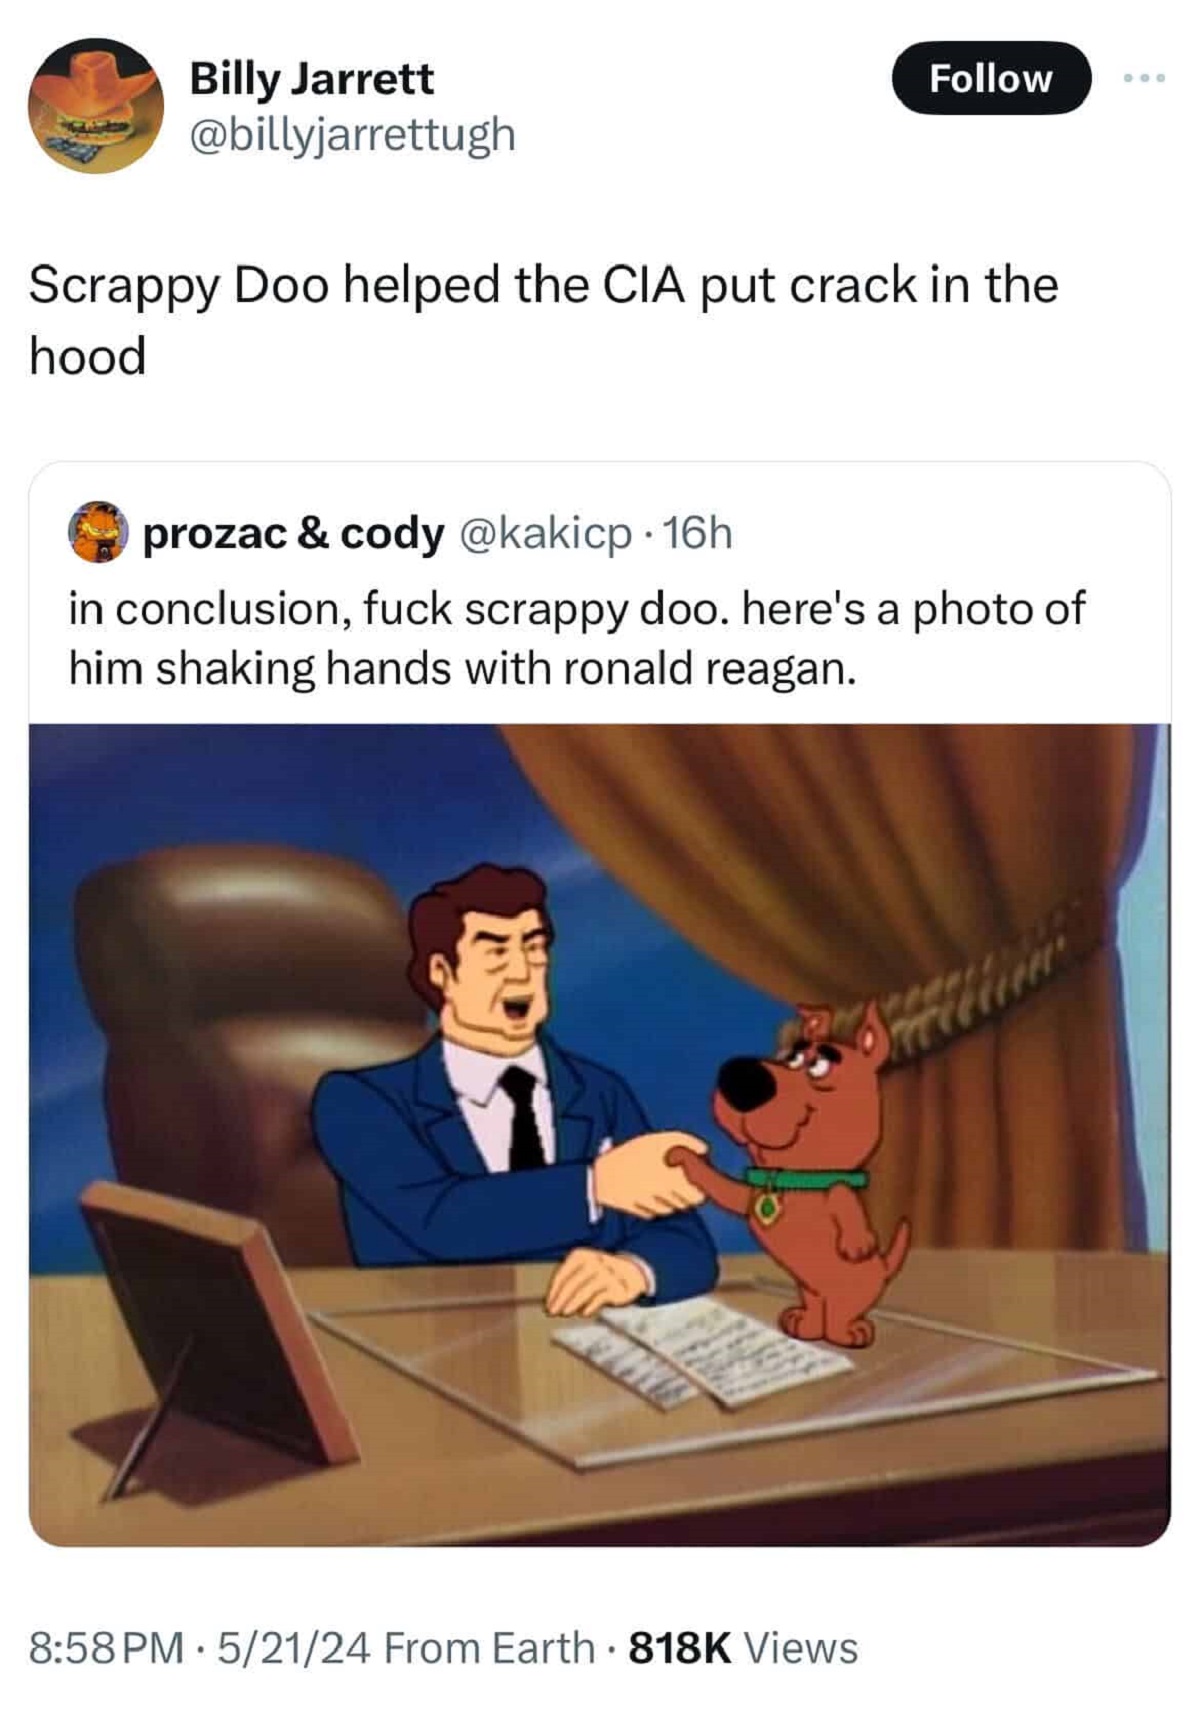 scrappy doo meeting president reagan - Billy Jarrett Scrappy Doo helped the Cia put crack in the hood prozac & cody in conclusion, fuck scrappy doo. here's a photo of him shaking hands with ronald reagan. 52124 From Earth Views .